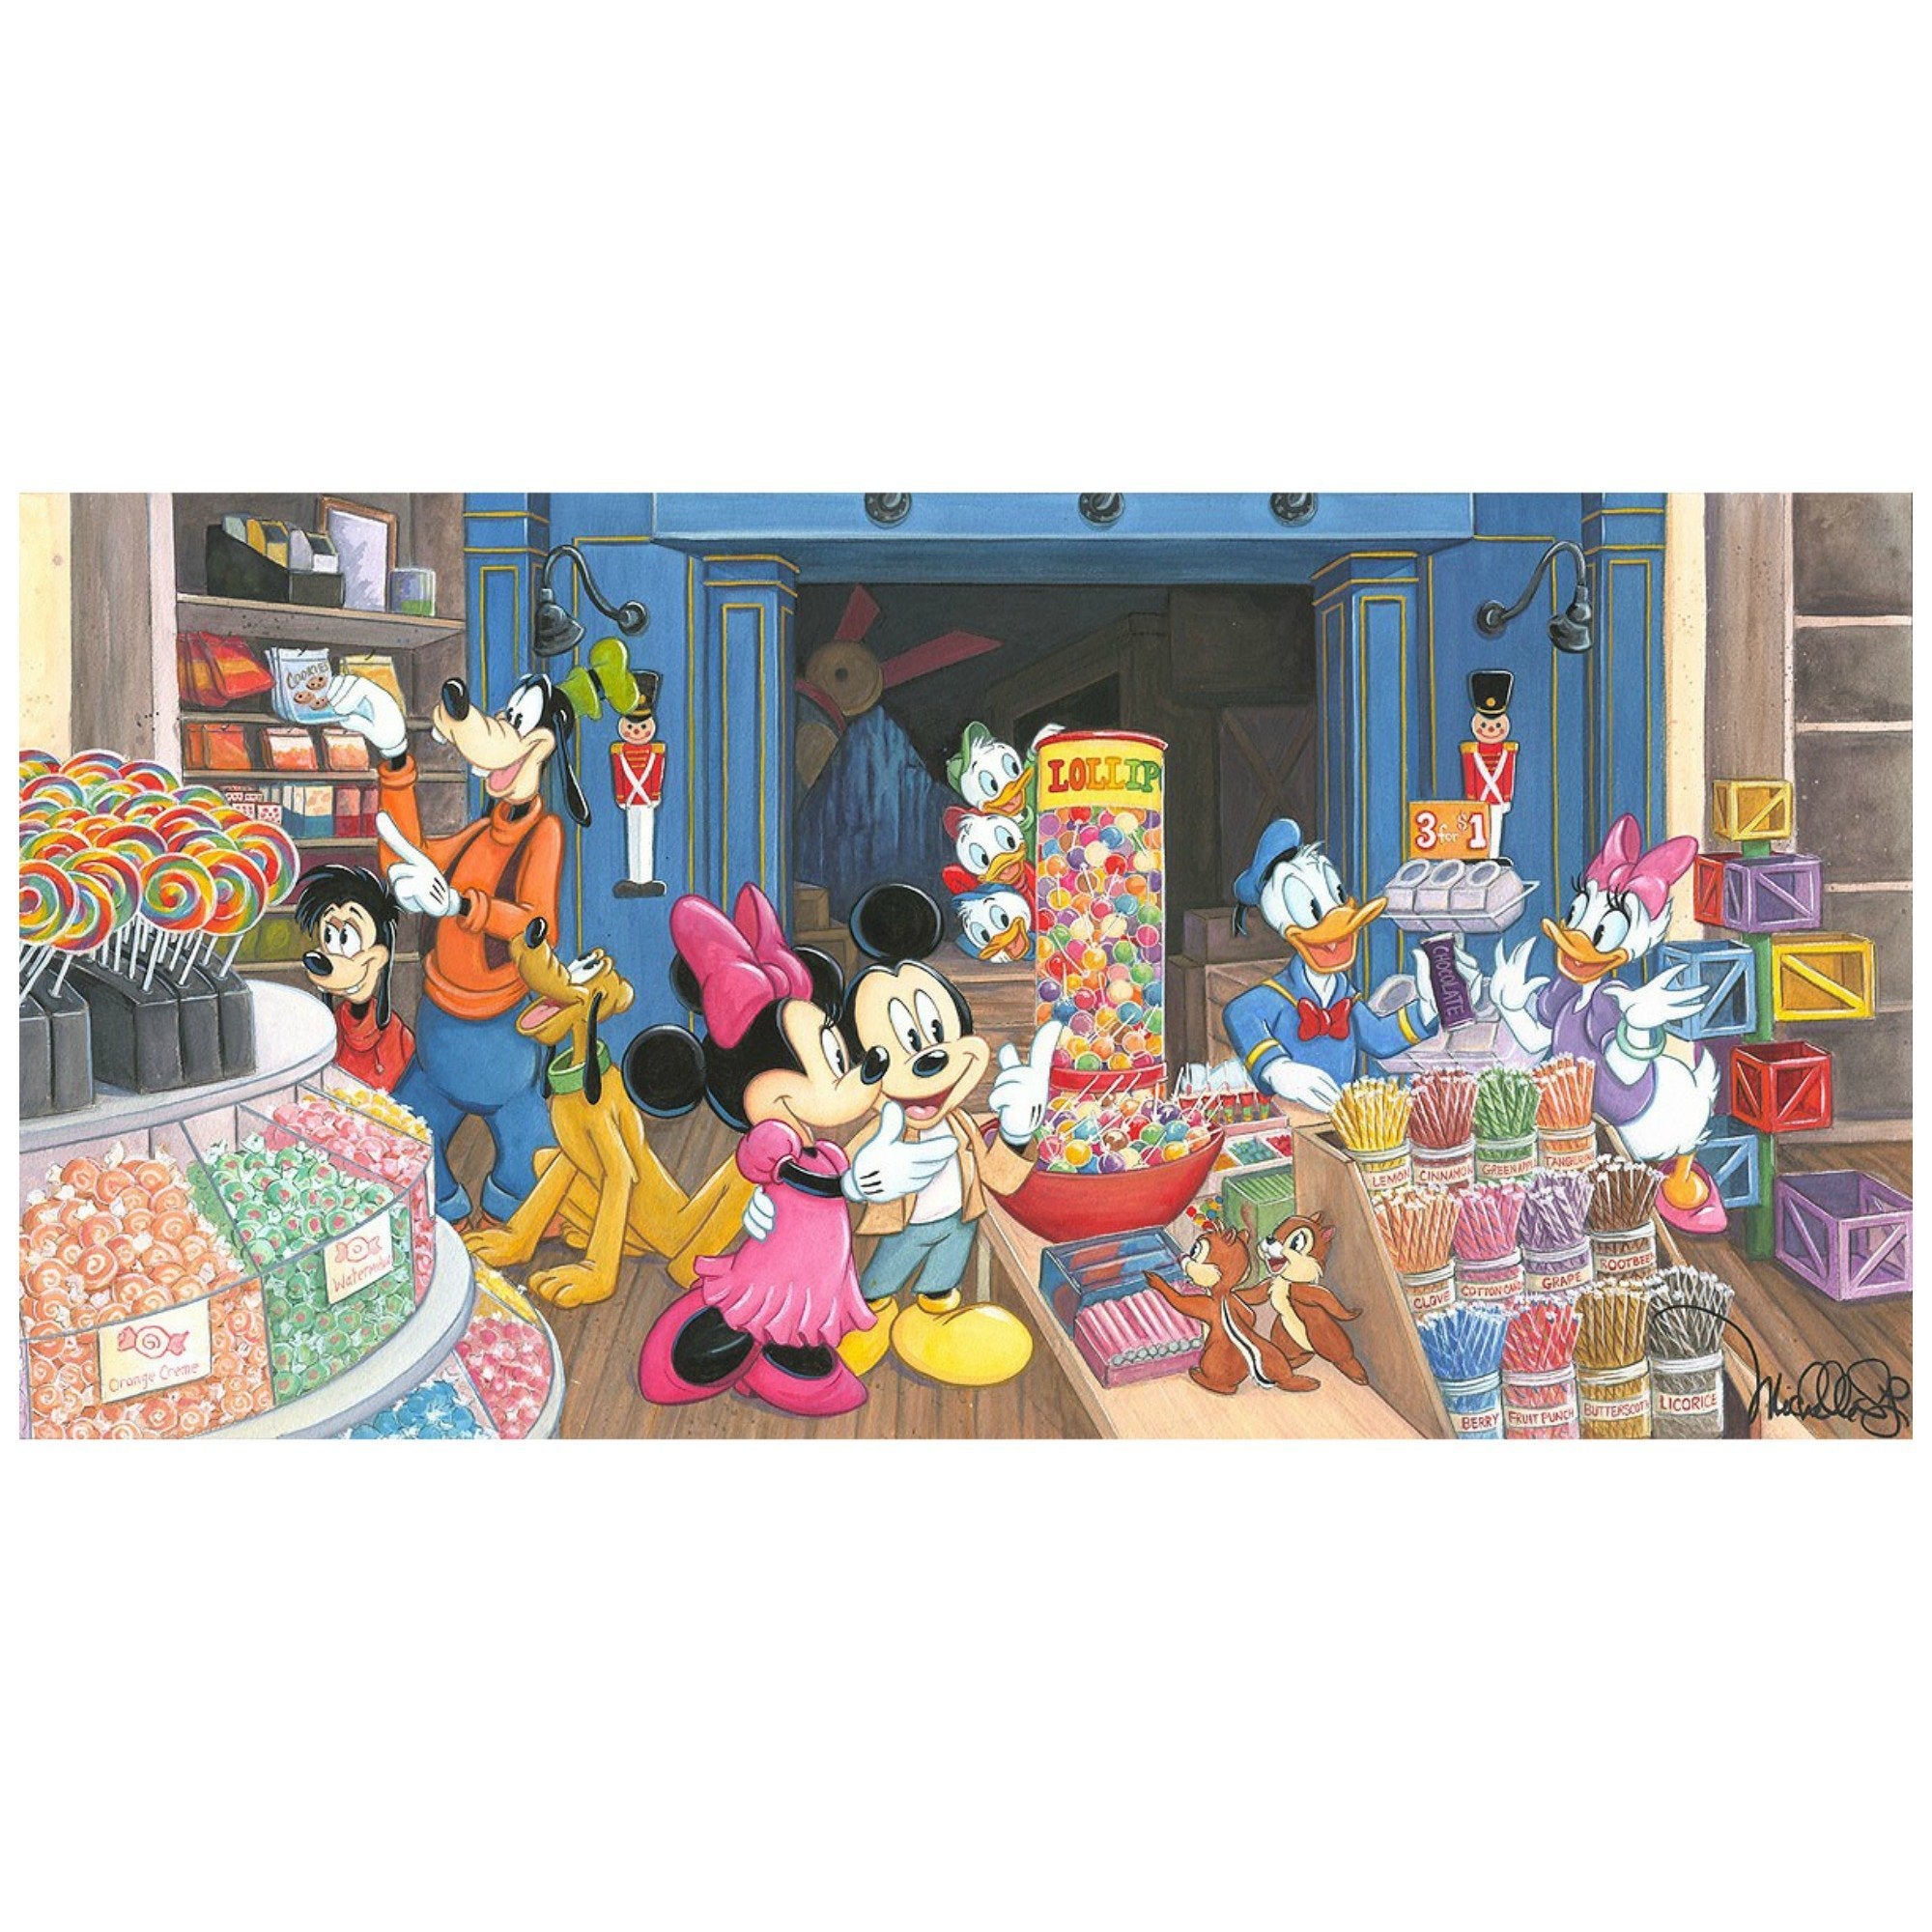 Mickey, Minnie and the gang of seven, browse through the local candy store, by Michelle St. Laurent.